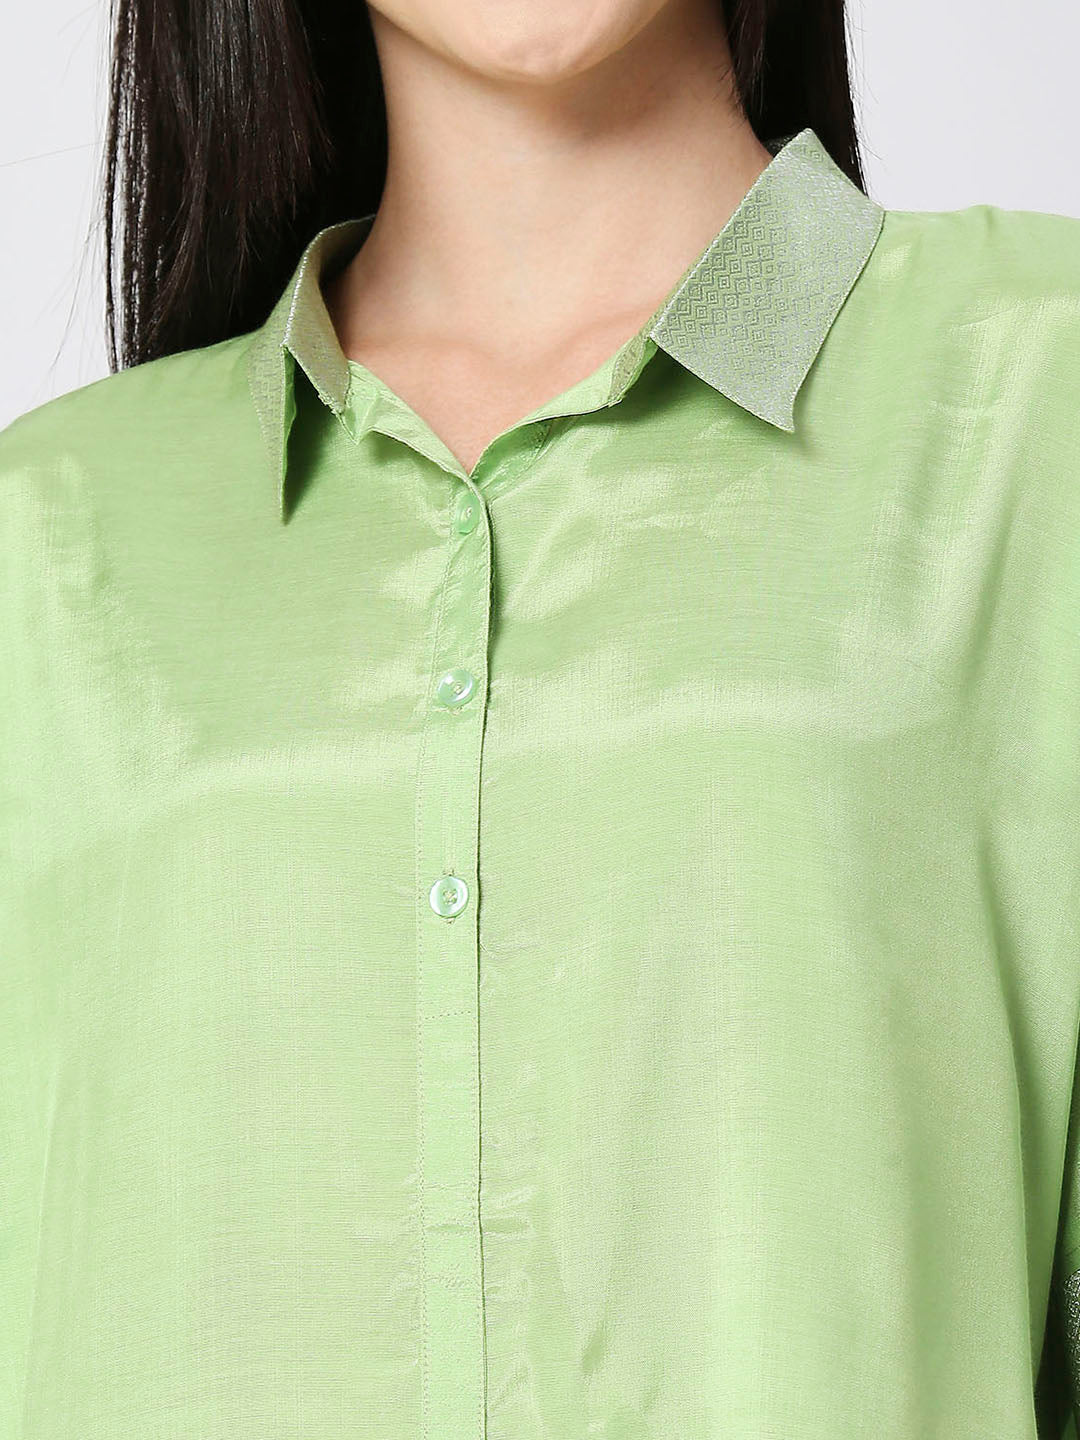 Iceberg Green Solid Viscose Top with Brocade Trims & Pant